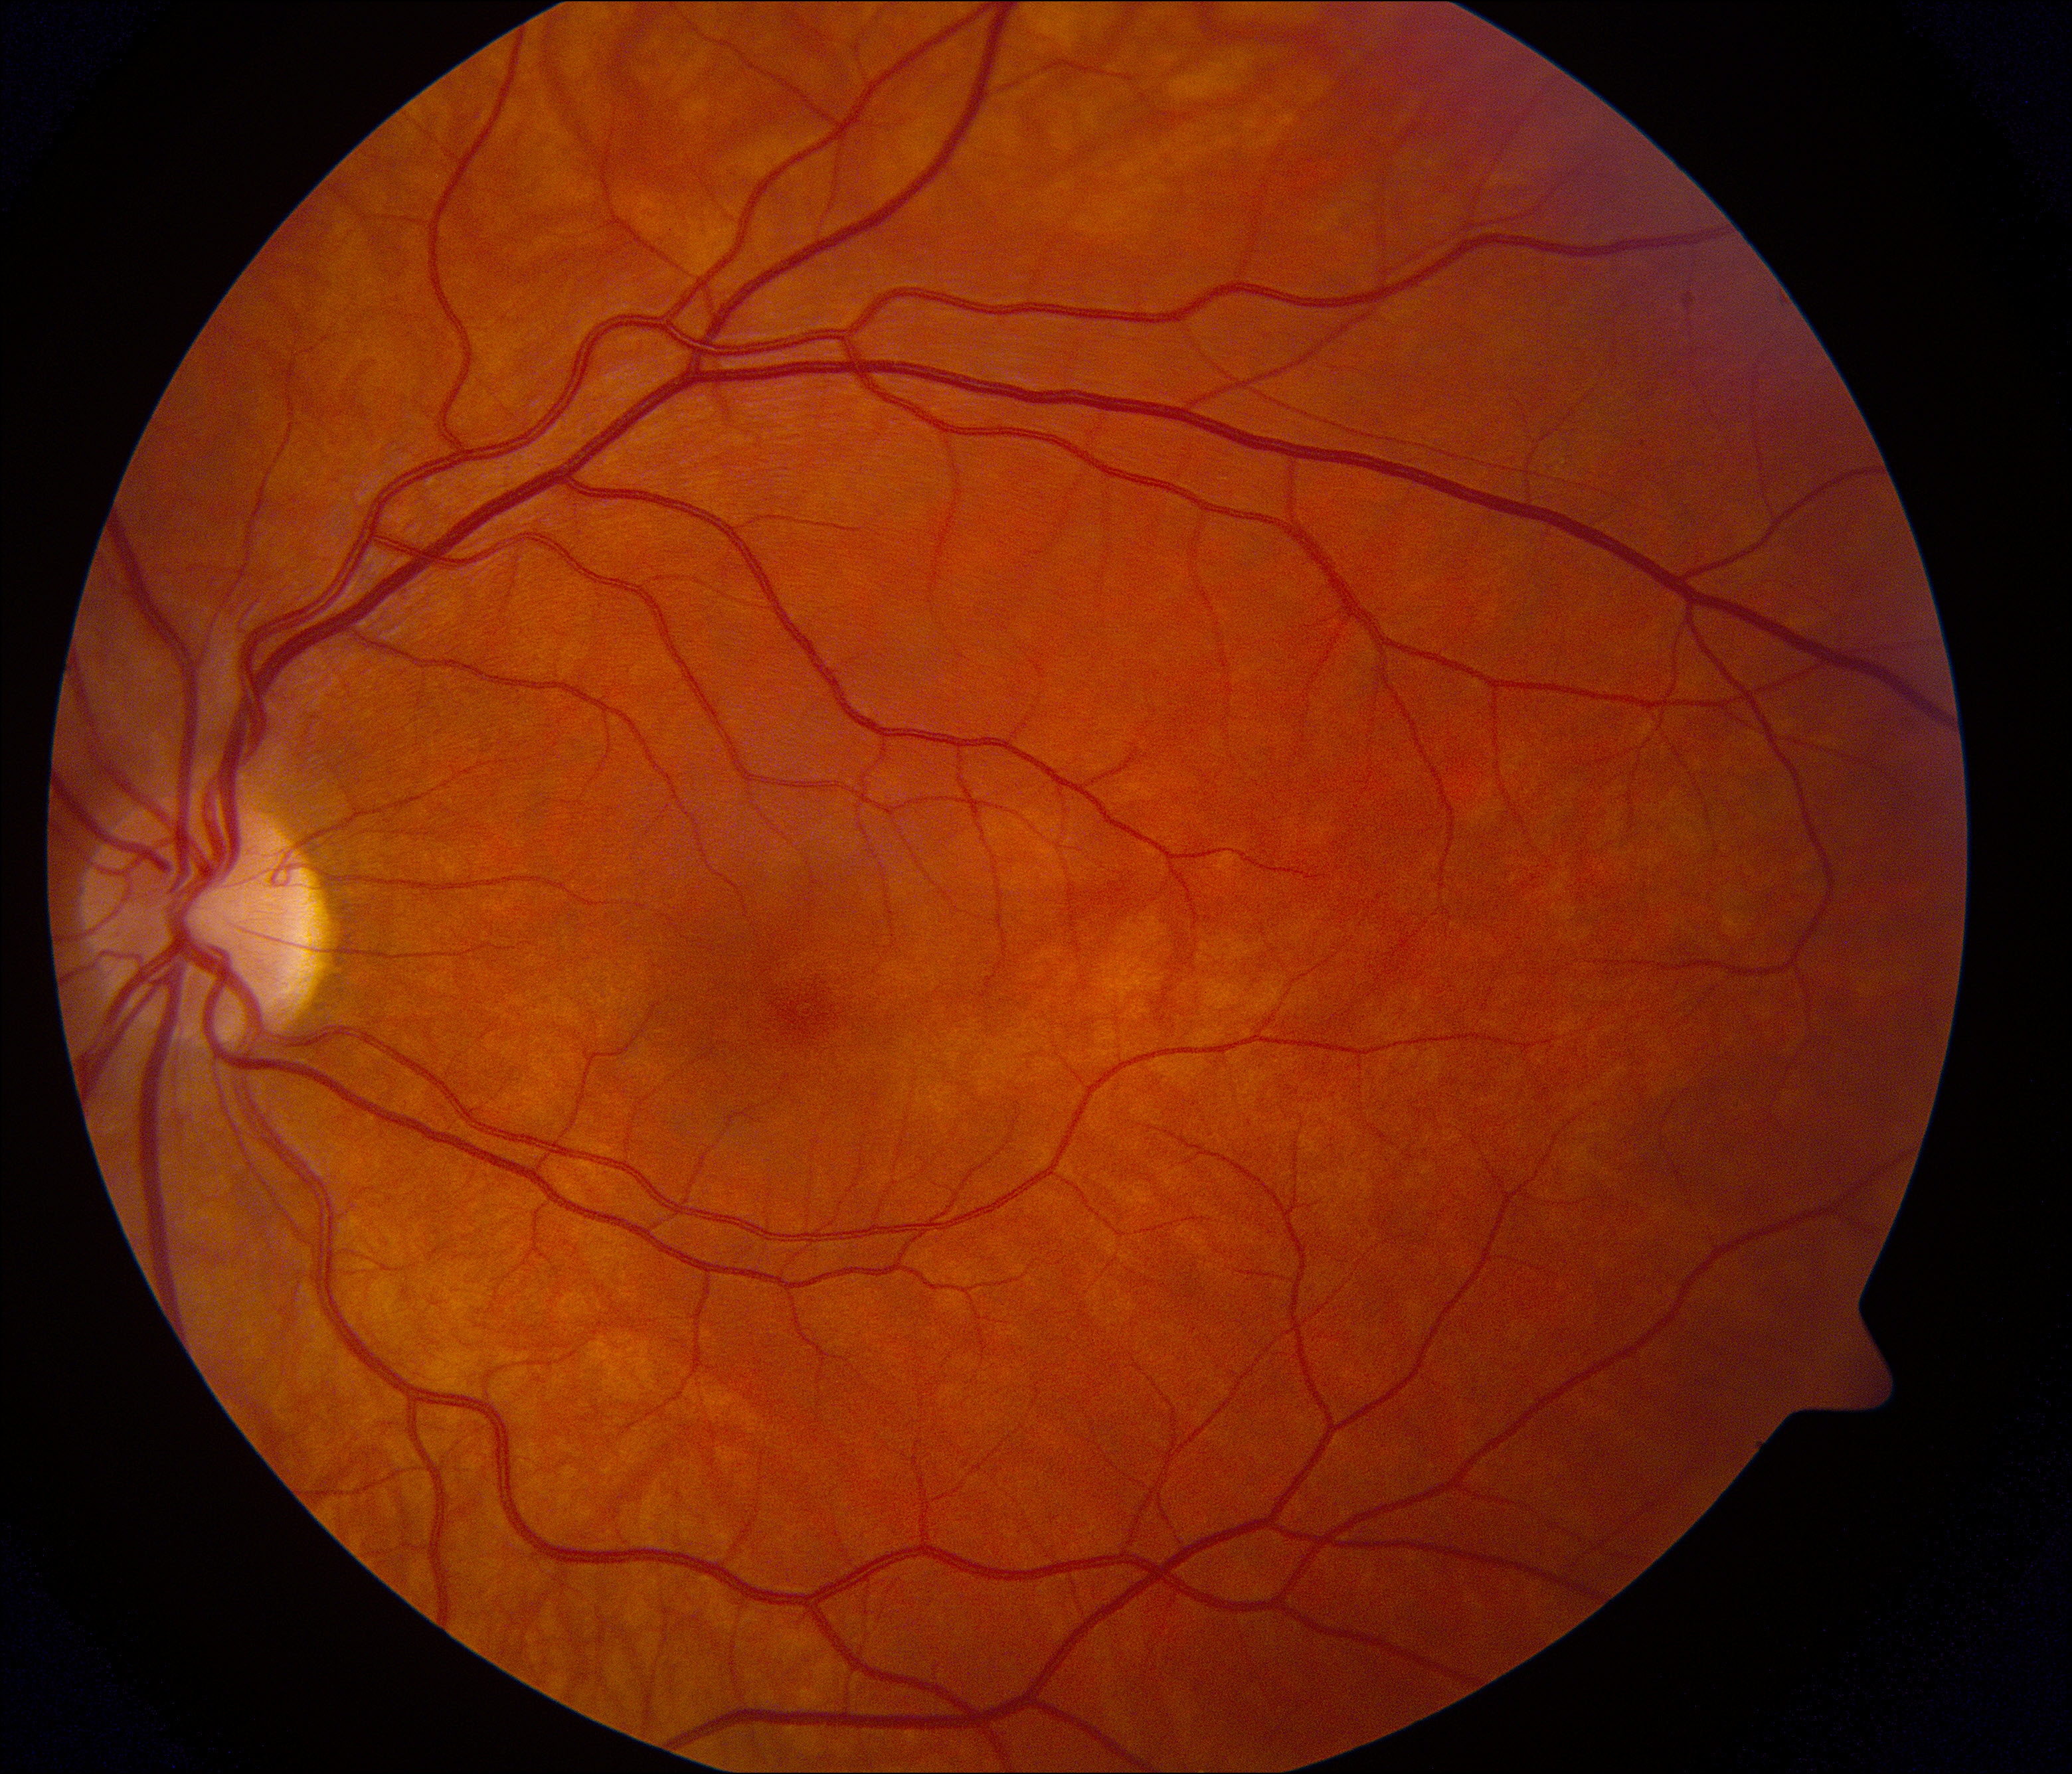 Color fundus photograph of the left eye in a healthy patient